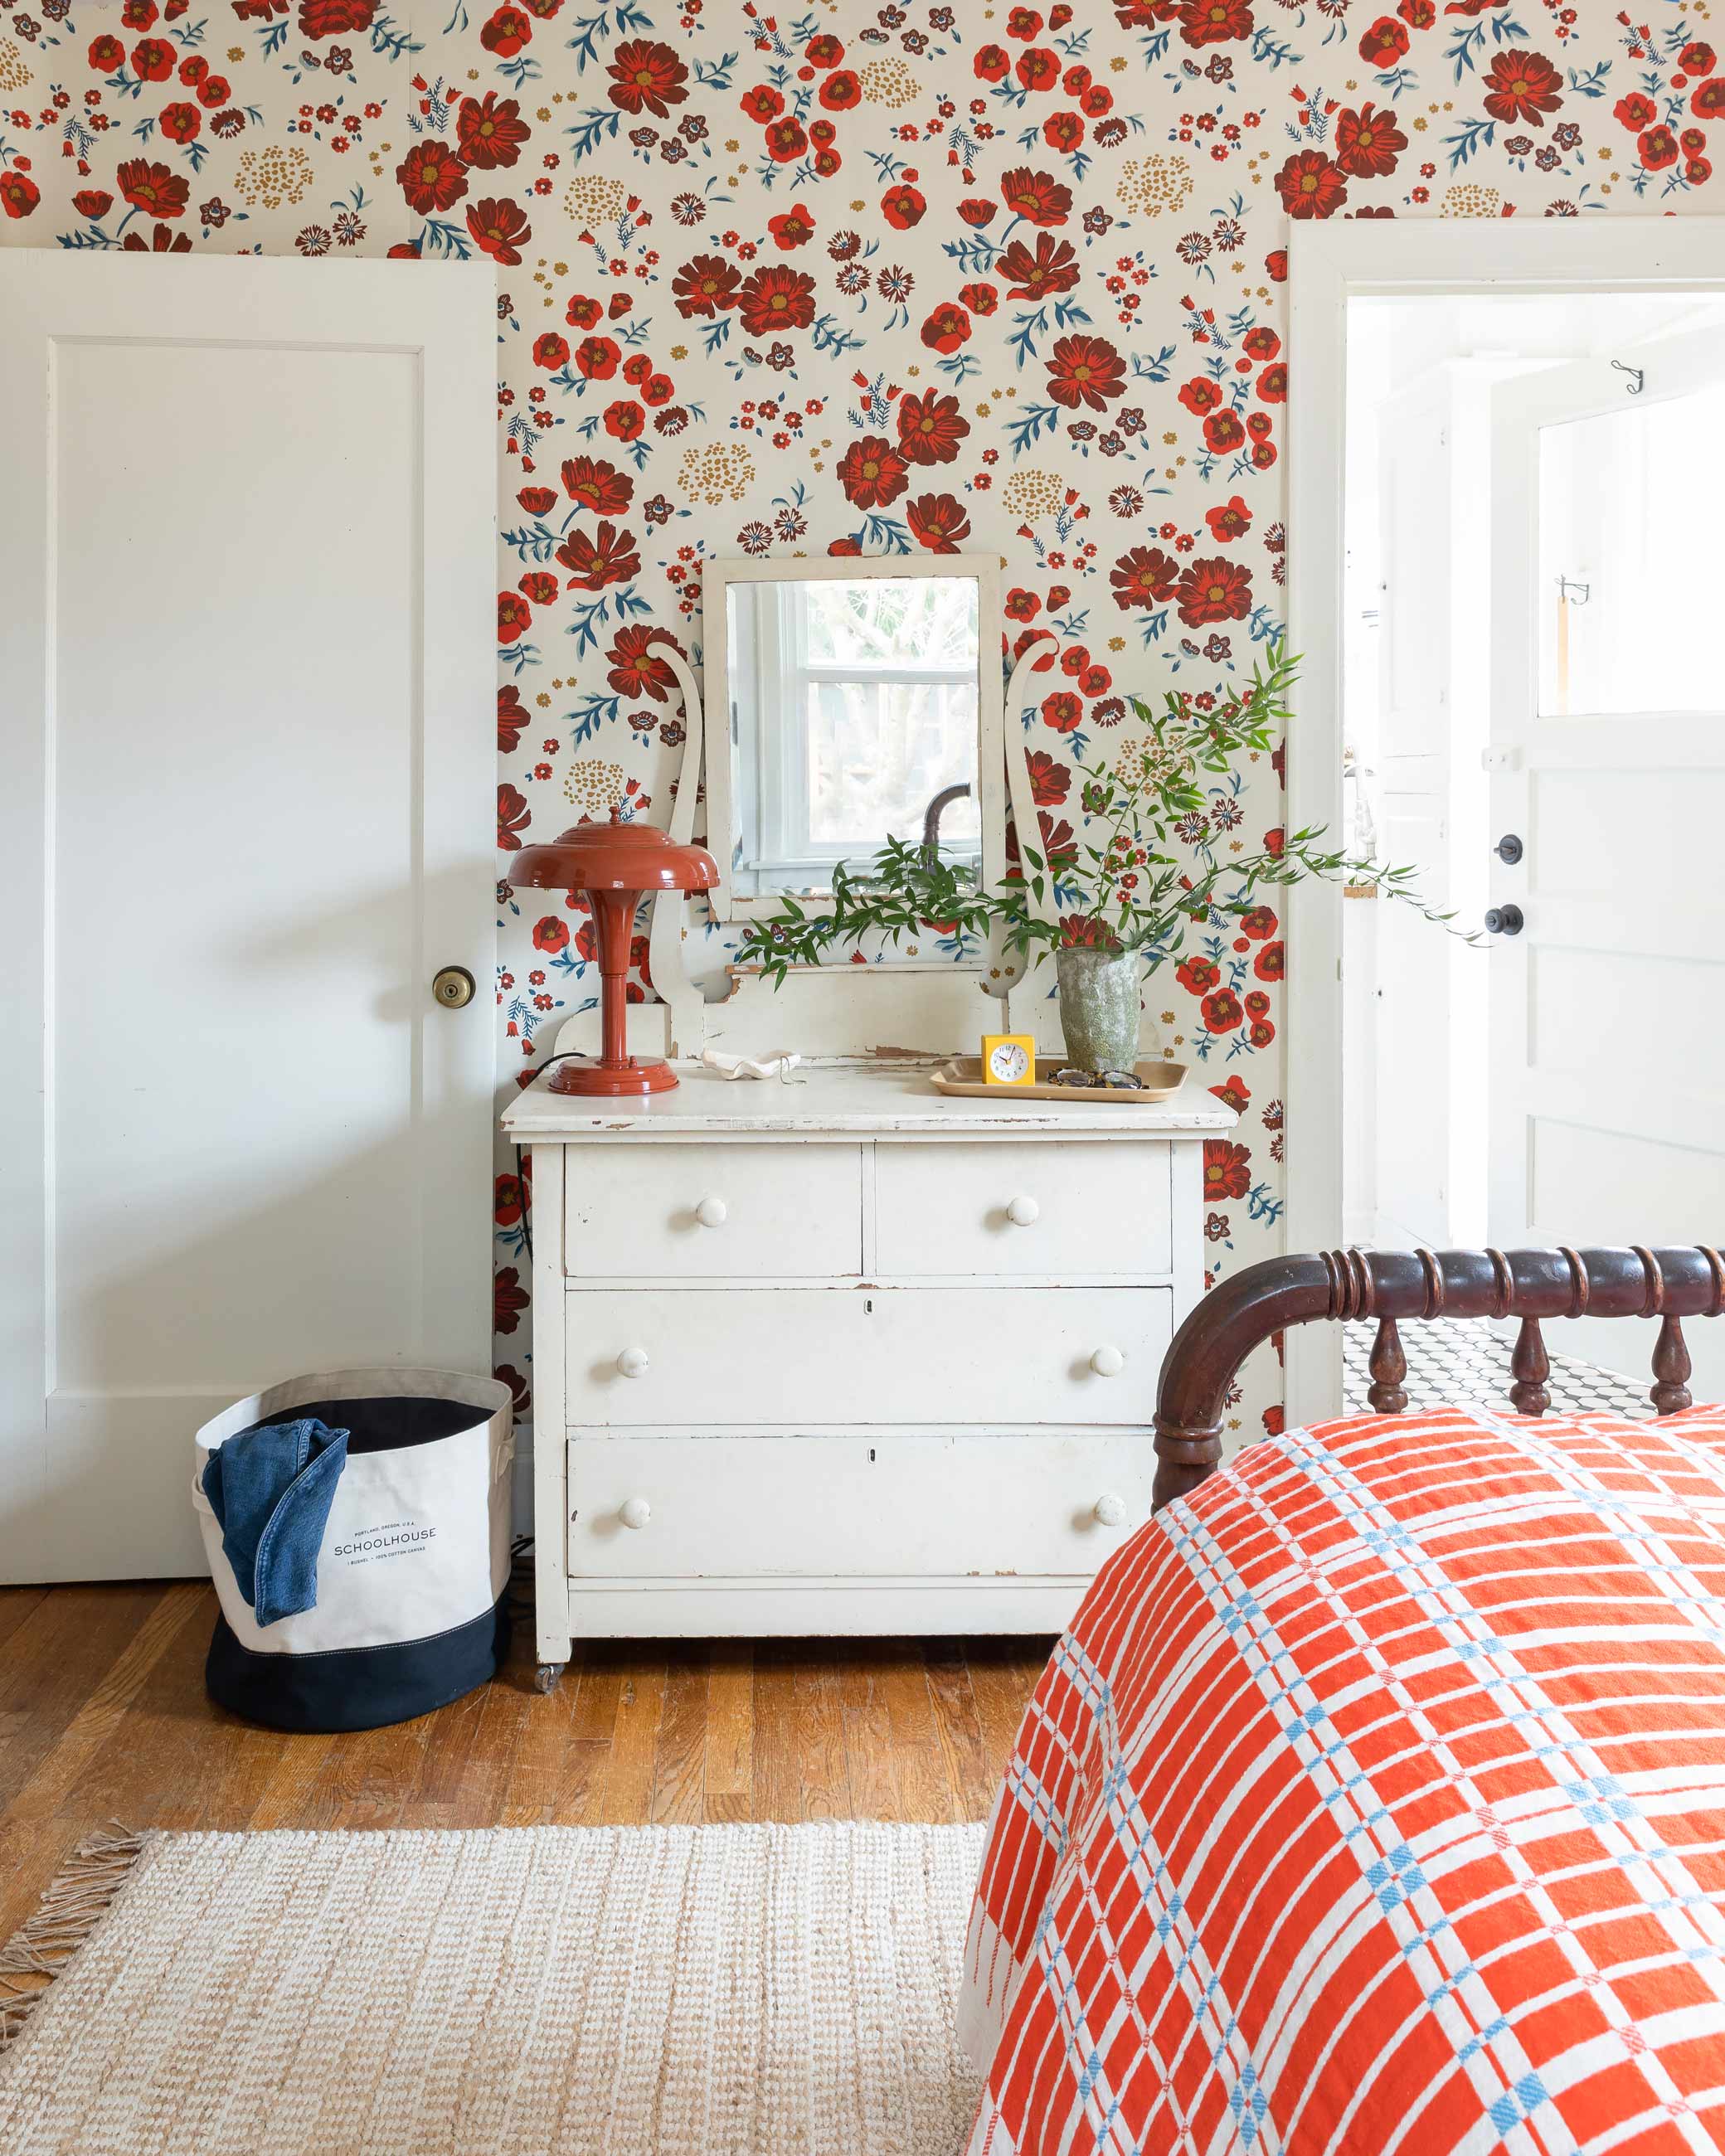 Brightly colored bedroom with red floral wallpaper and matching bedding.